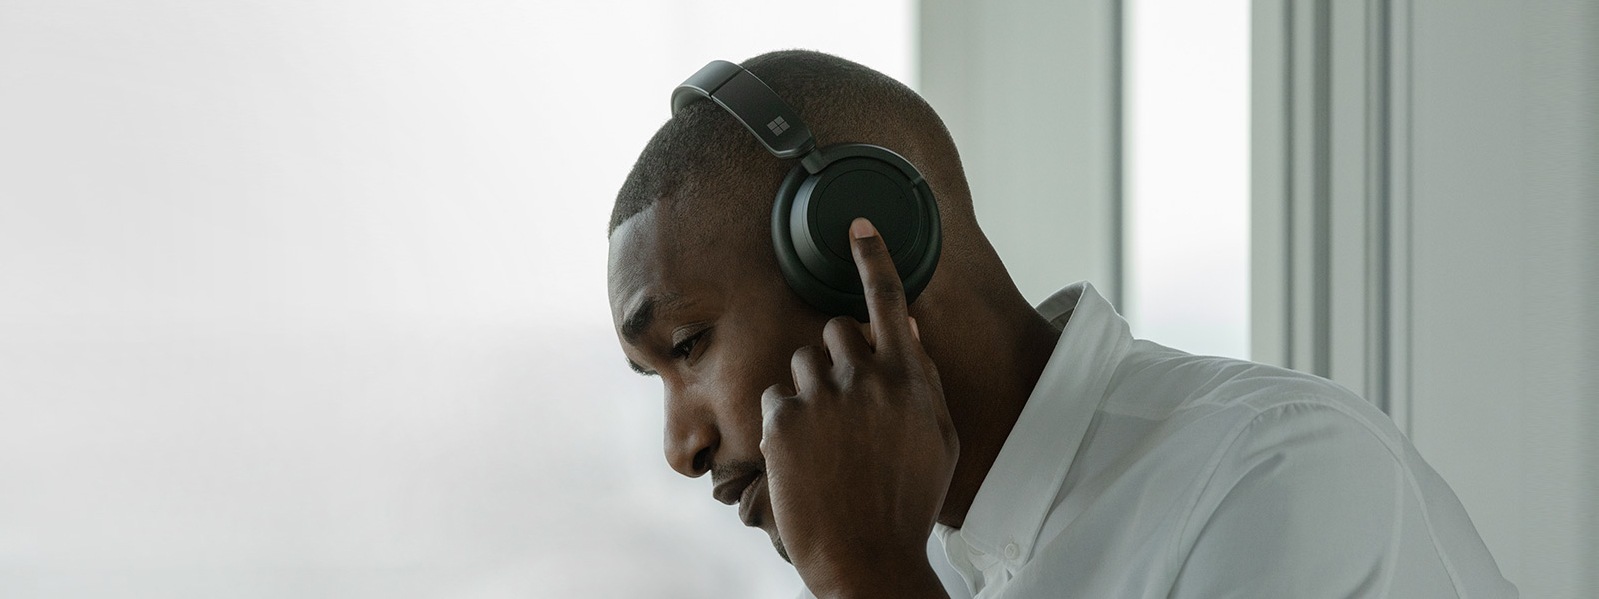 A man wears the black Headphones 2 while touching the left dial